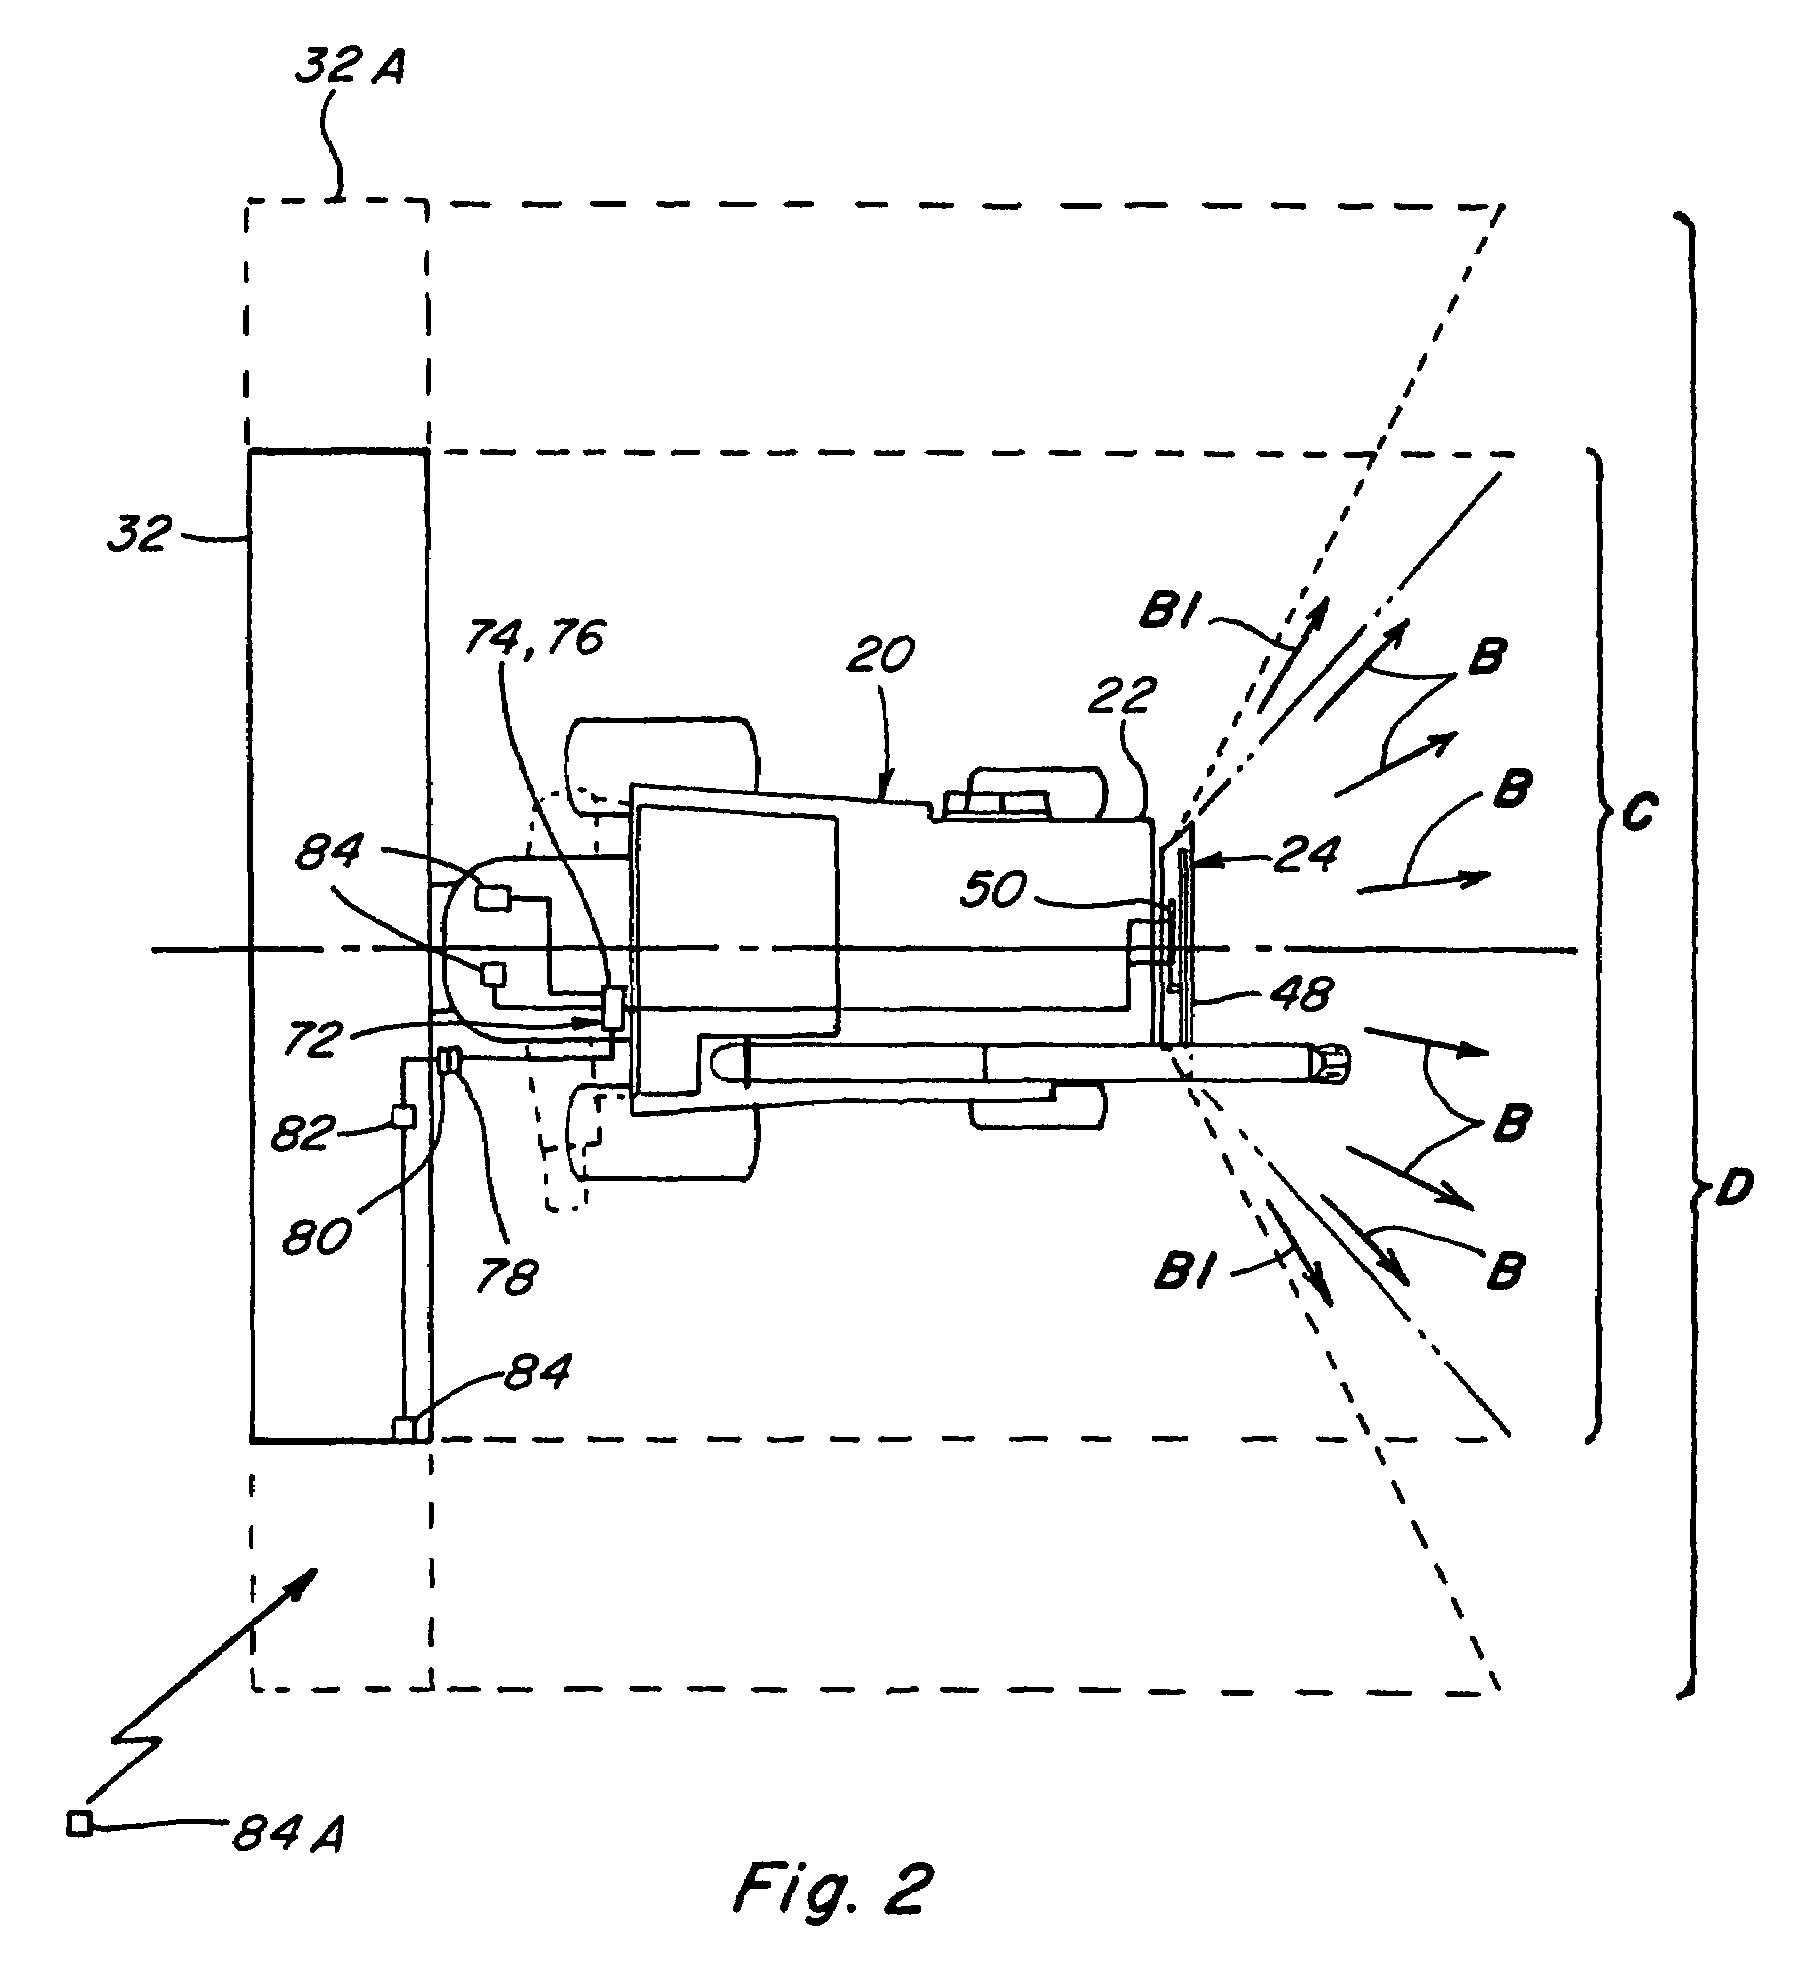 Apparatus and method for automatically setting operating parameters for a remotely adjustable spreader of an agricultural harvesting machine